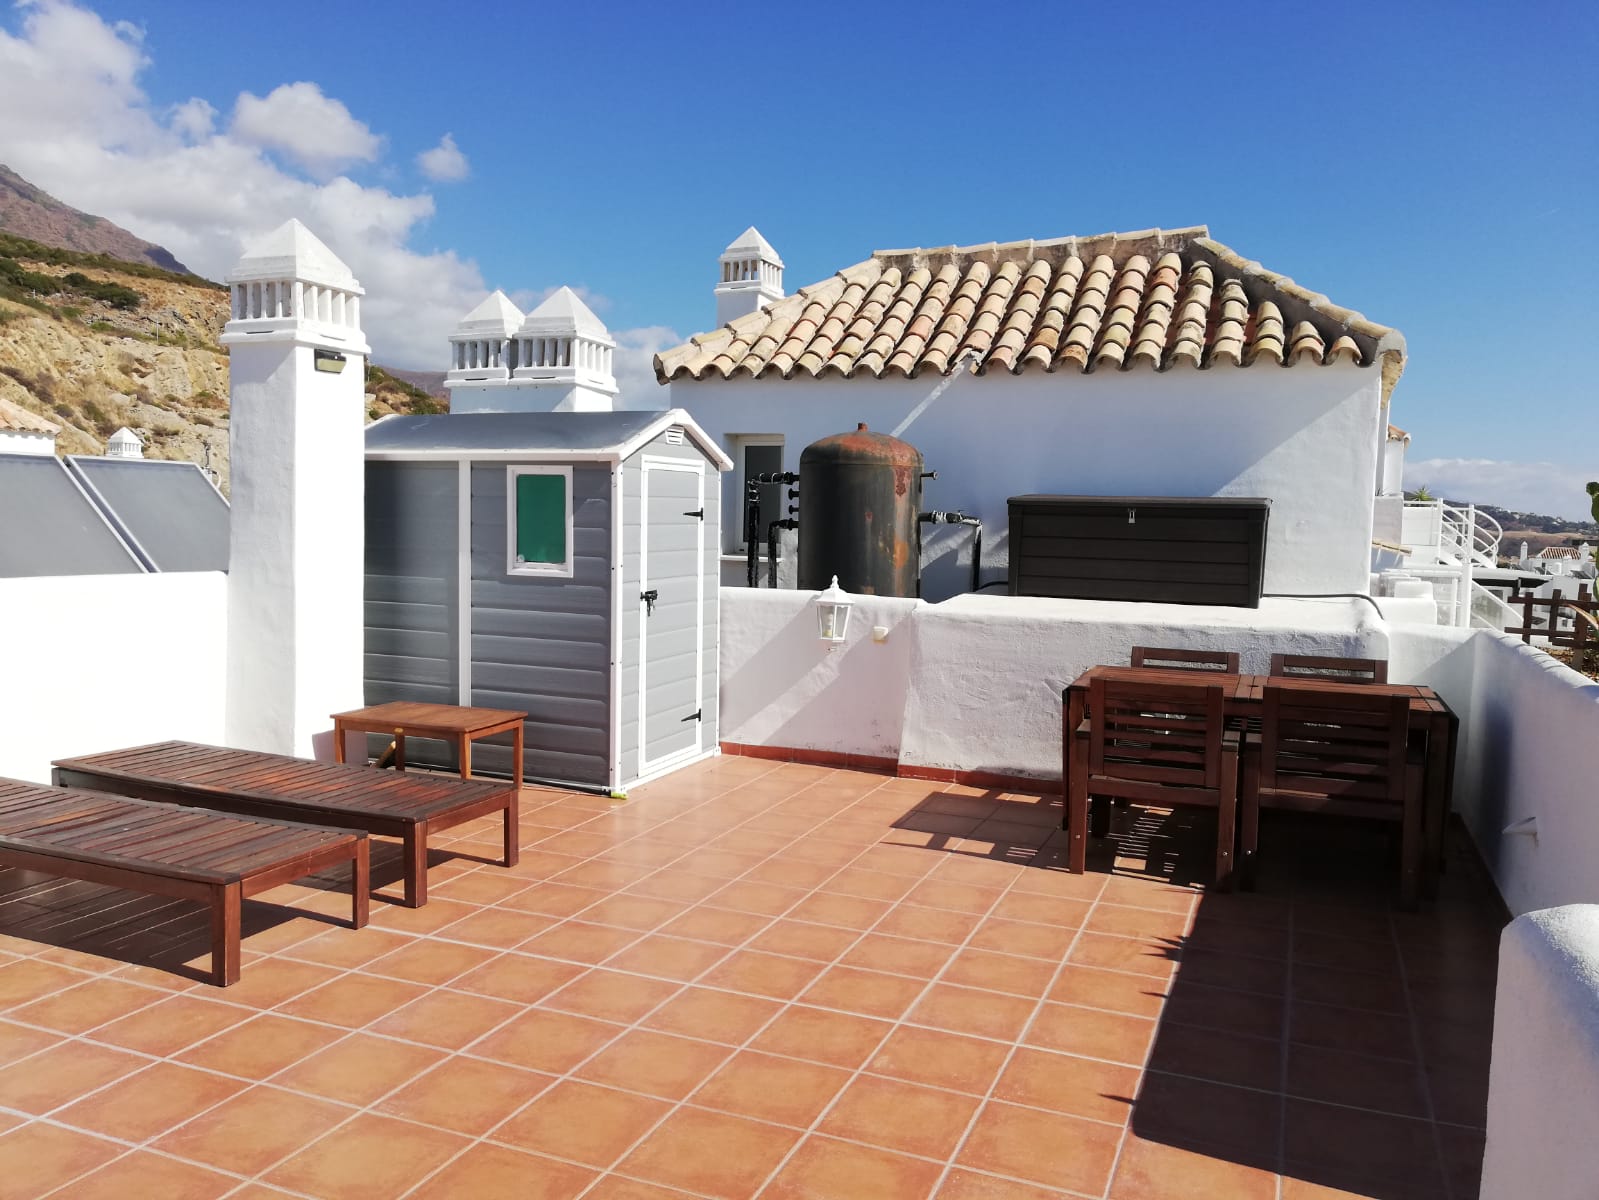 2 bedroom penthouse in Valle Romano opposite the golf course for rent - mibgroup.es